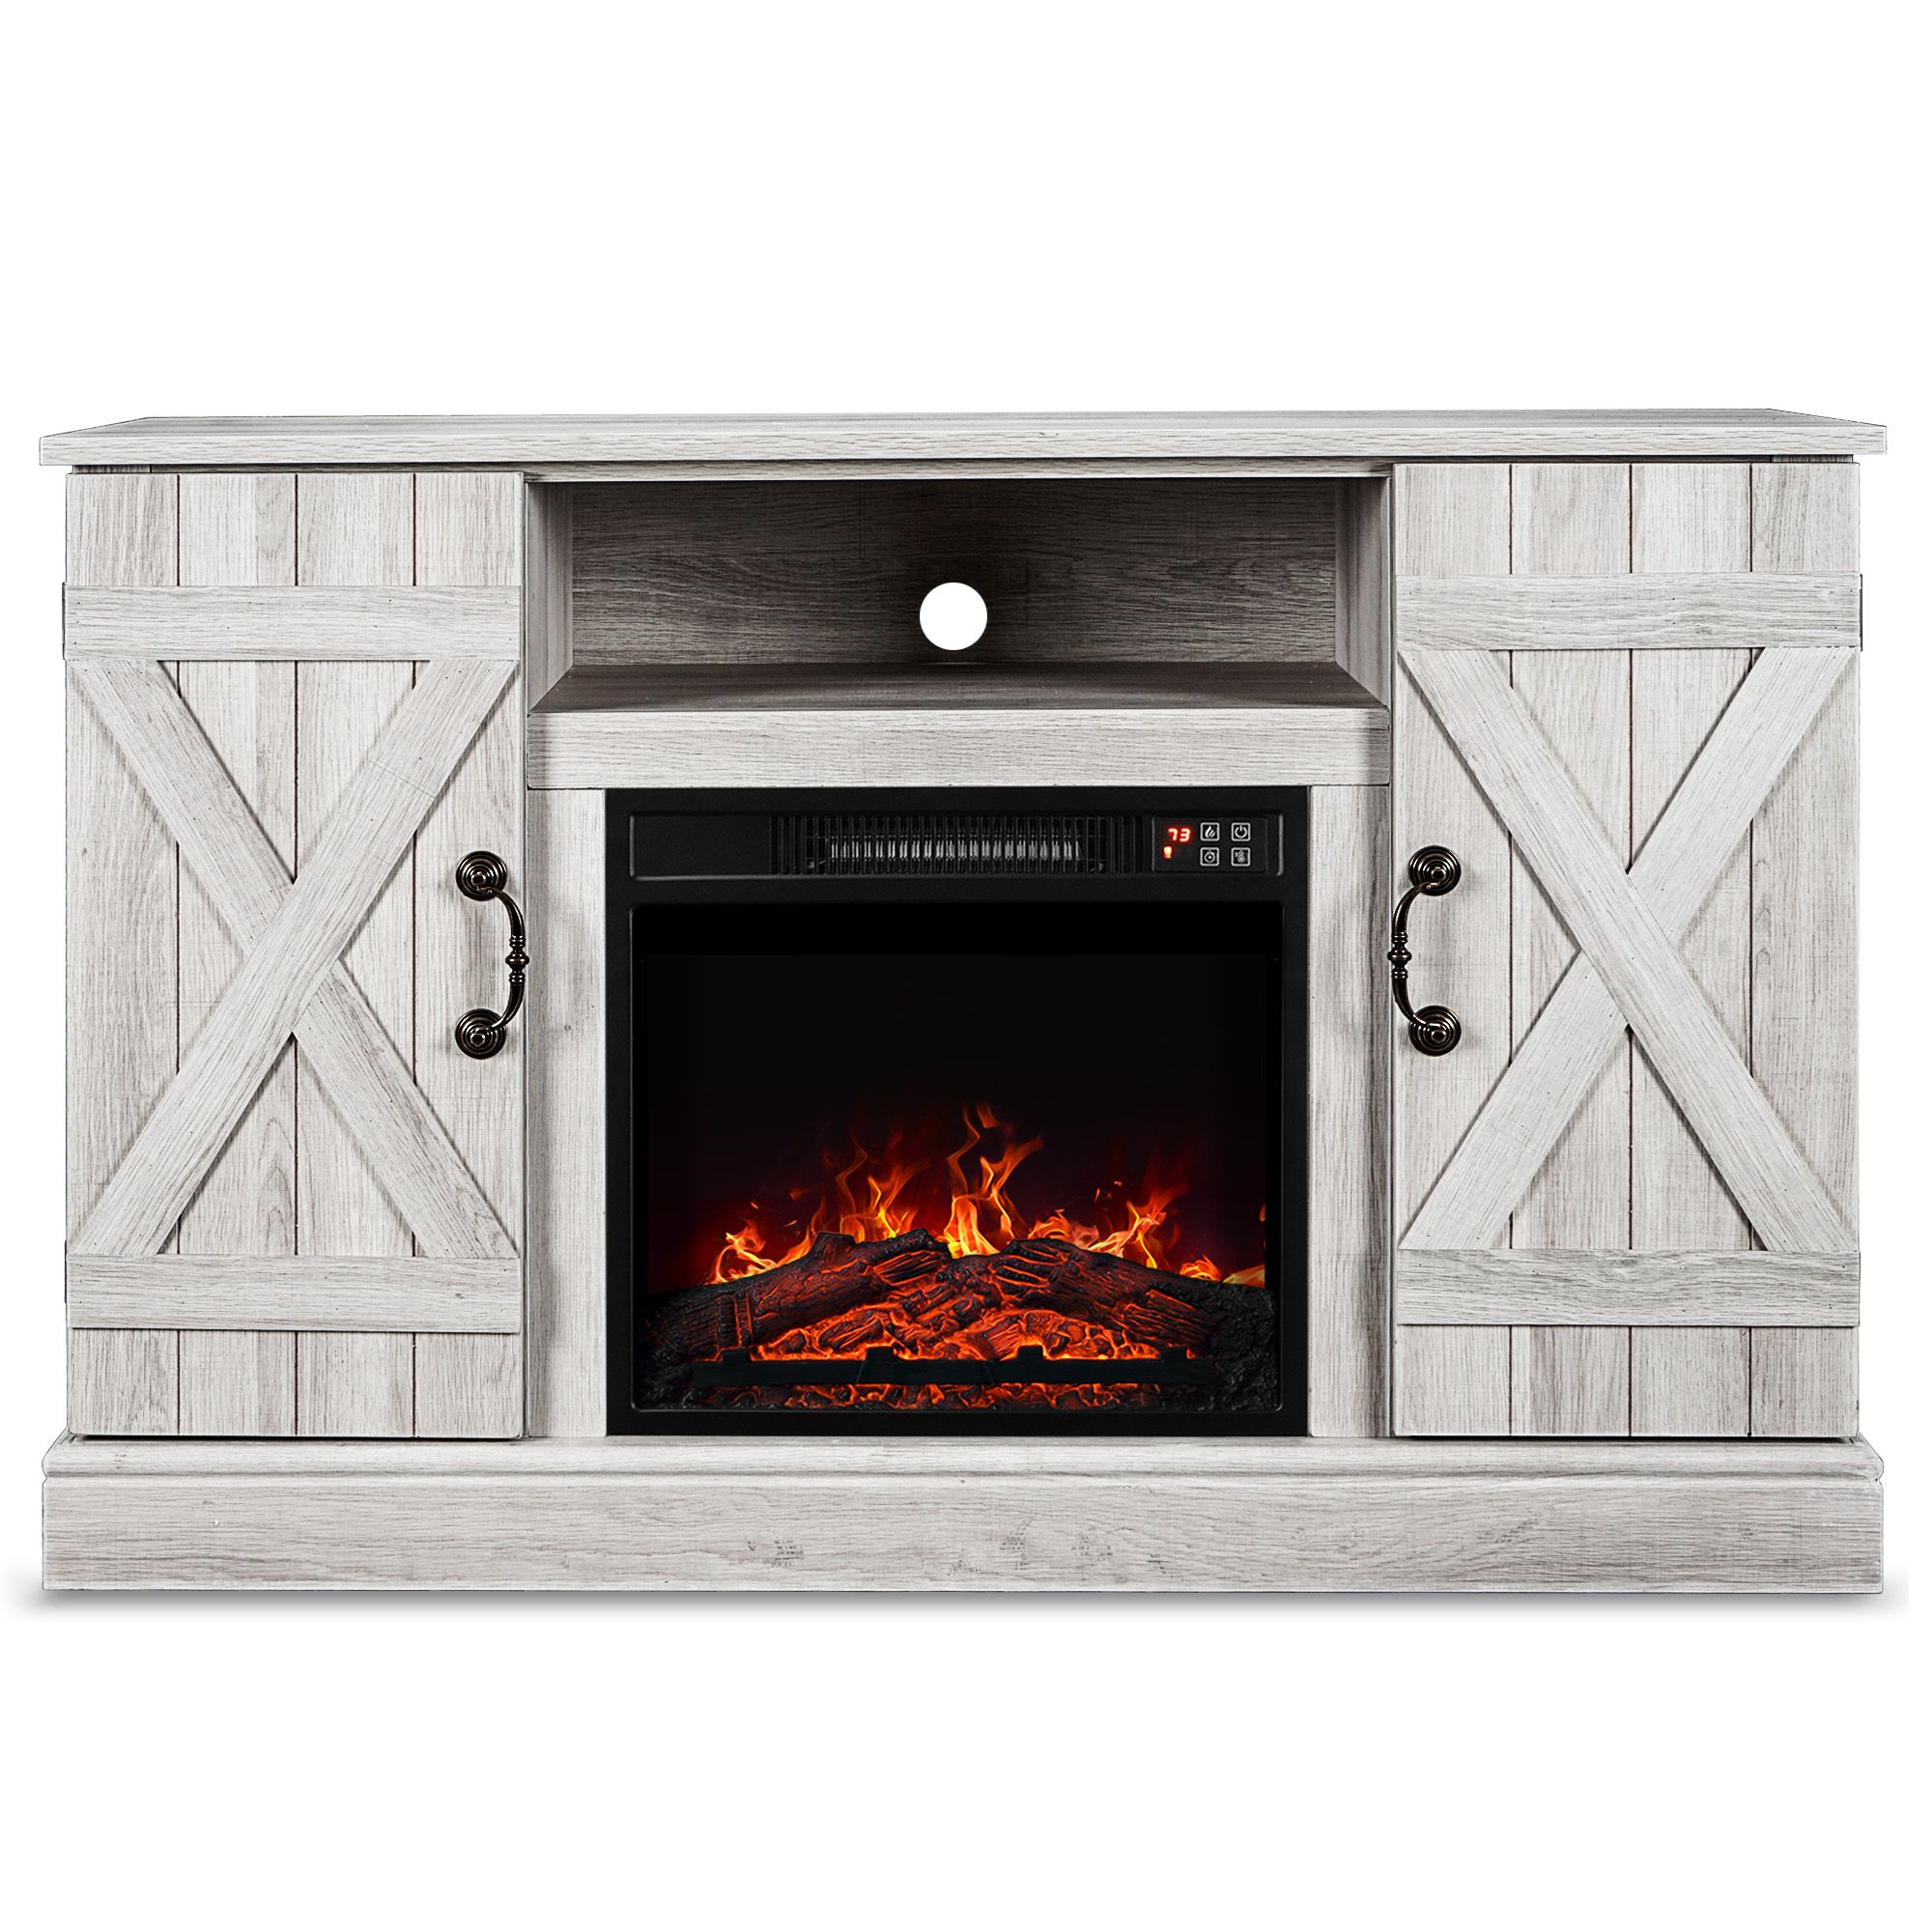 Belleze Infrared Electric Fireplace Tv Stand Entertainment Pertaining To 50 Inch Fireplace Tv Stands (View 9 of 15)